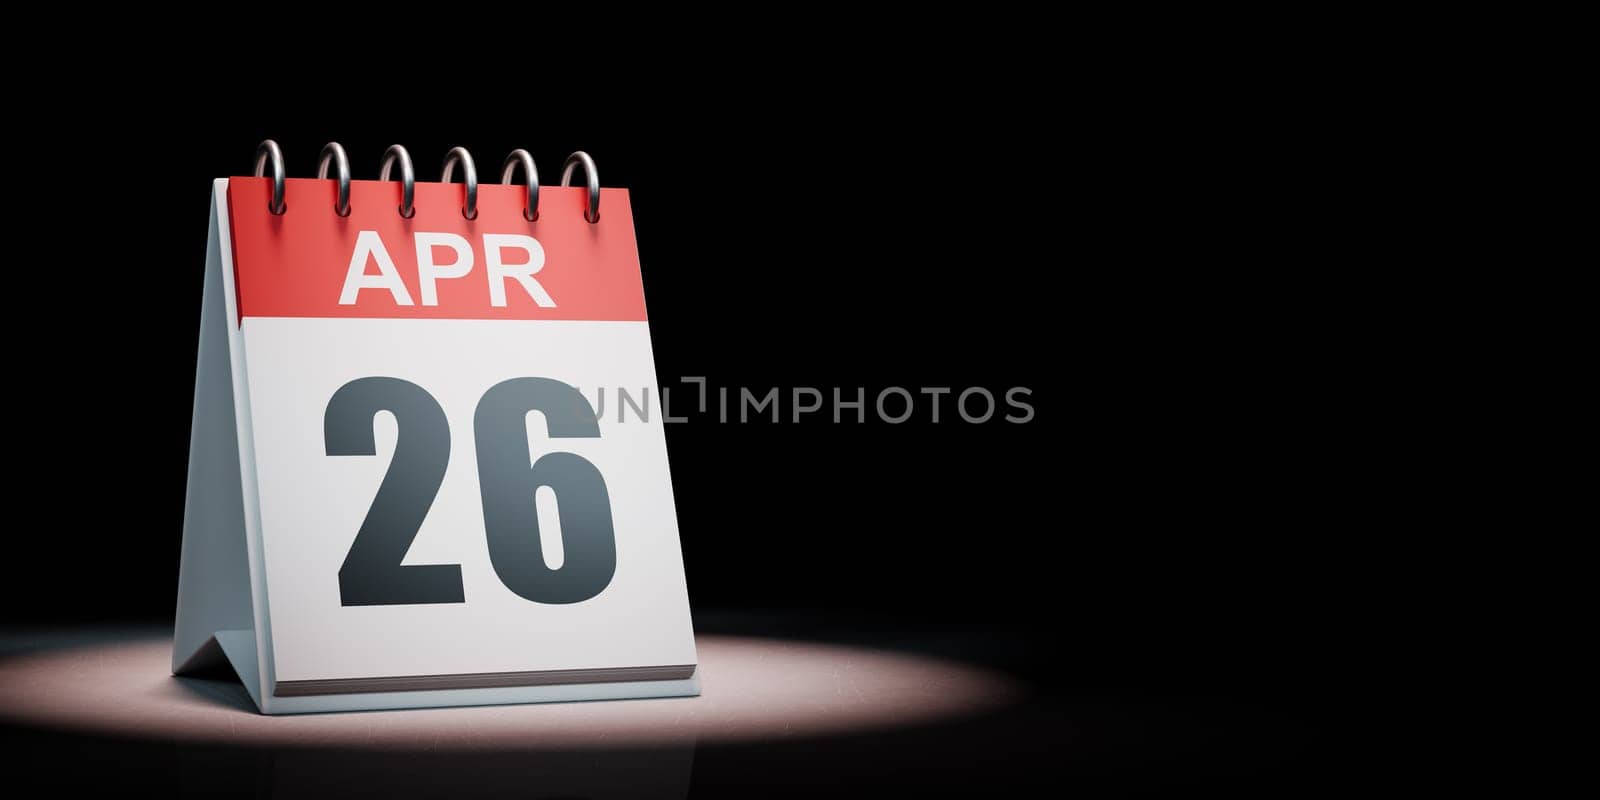 Red and White April 26 Desk Calendar Spotlighted on Black Background with Copy Space 3D Illustration